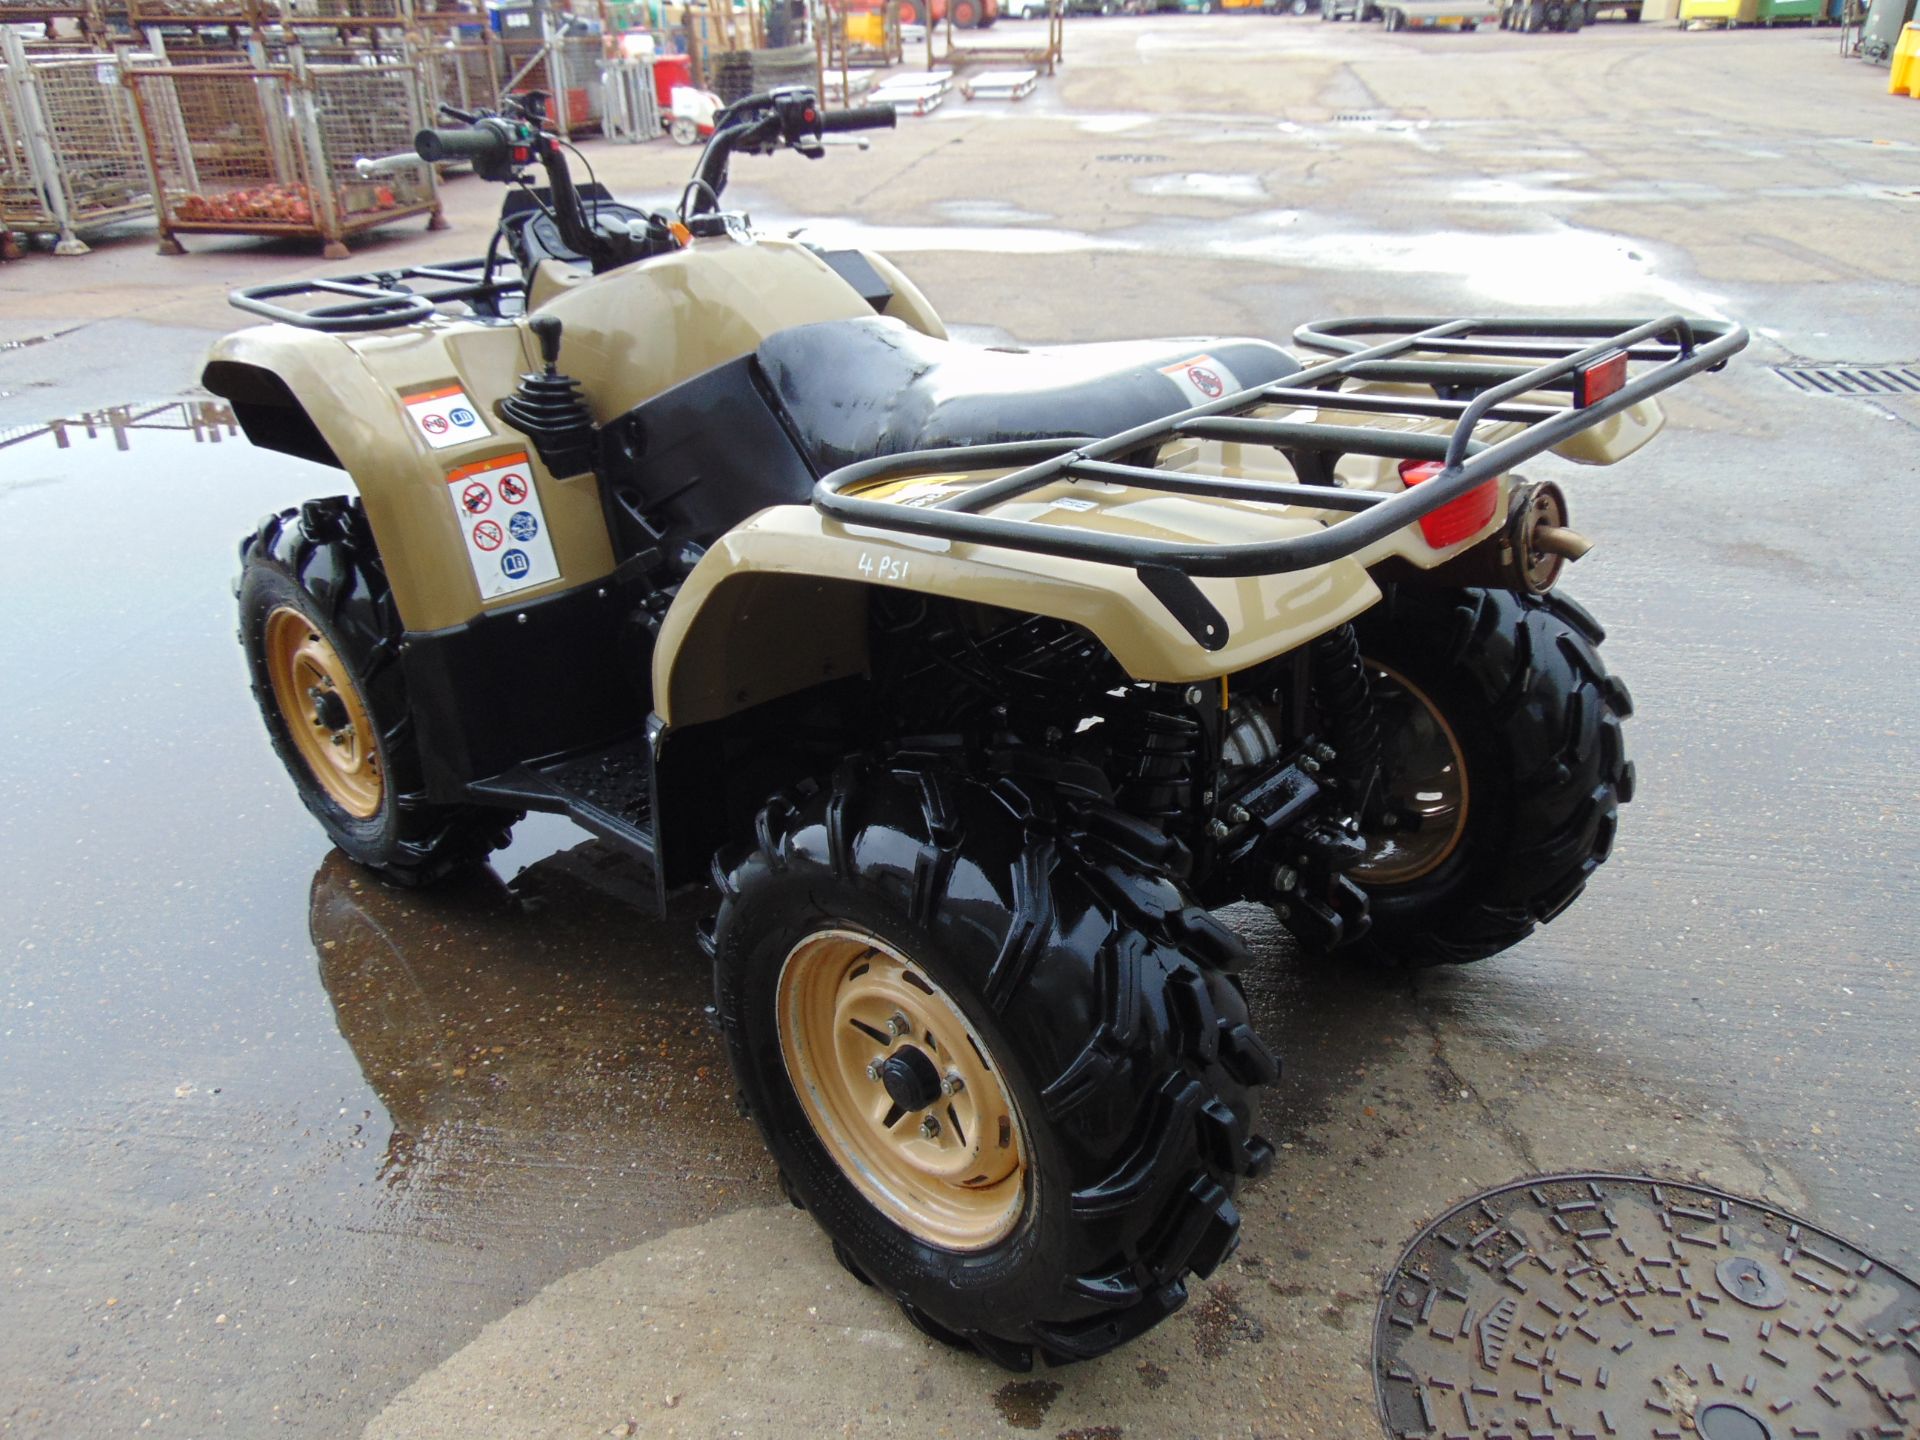 Military Specification Yamaha Grizzly 450 4 x 4 ATV Quad Bike - Image 10 of 23